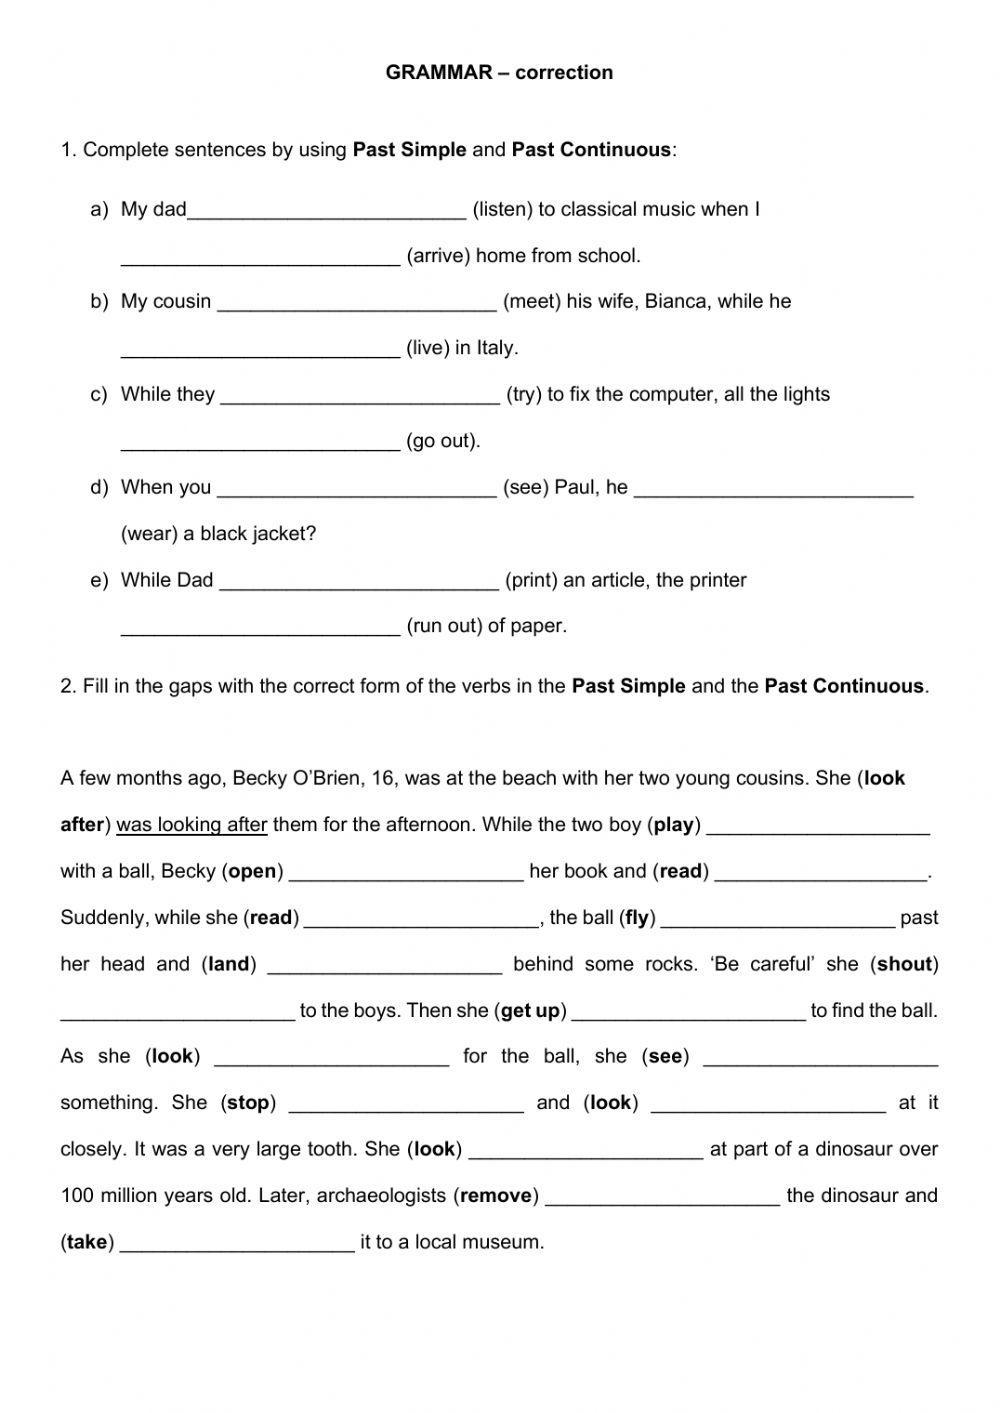 Engaging Grammar Worksheets For 7th Graders Interactive Learning Resources